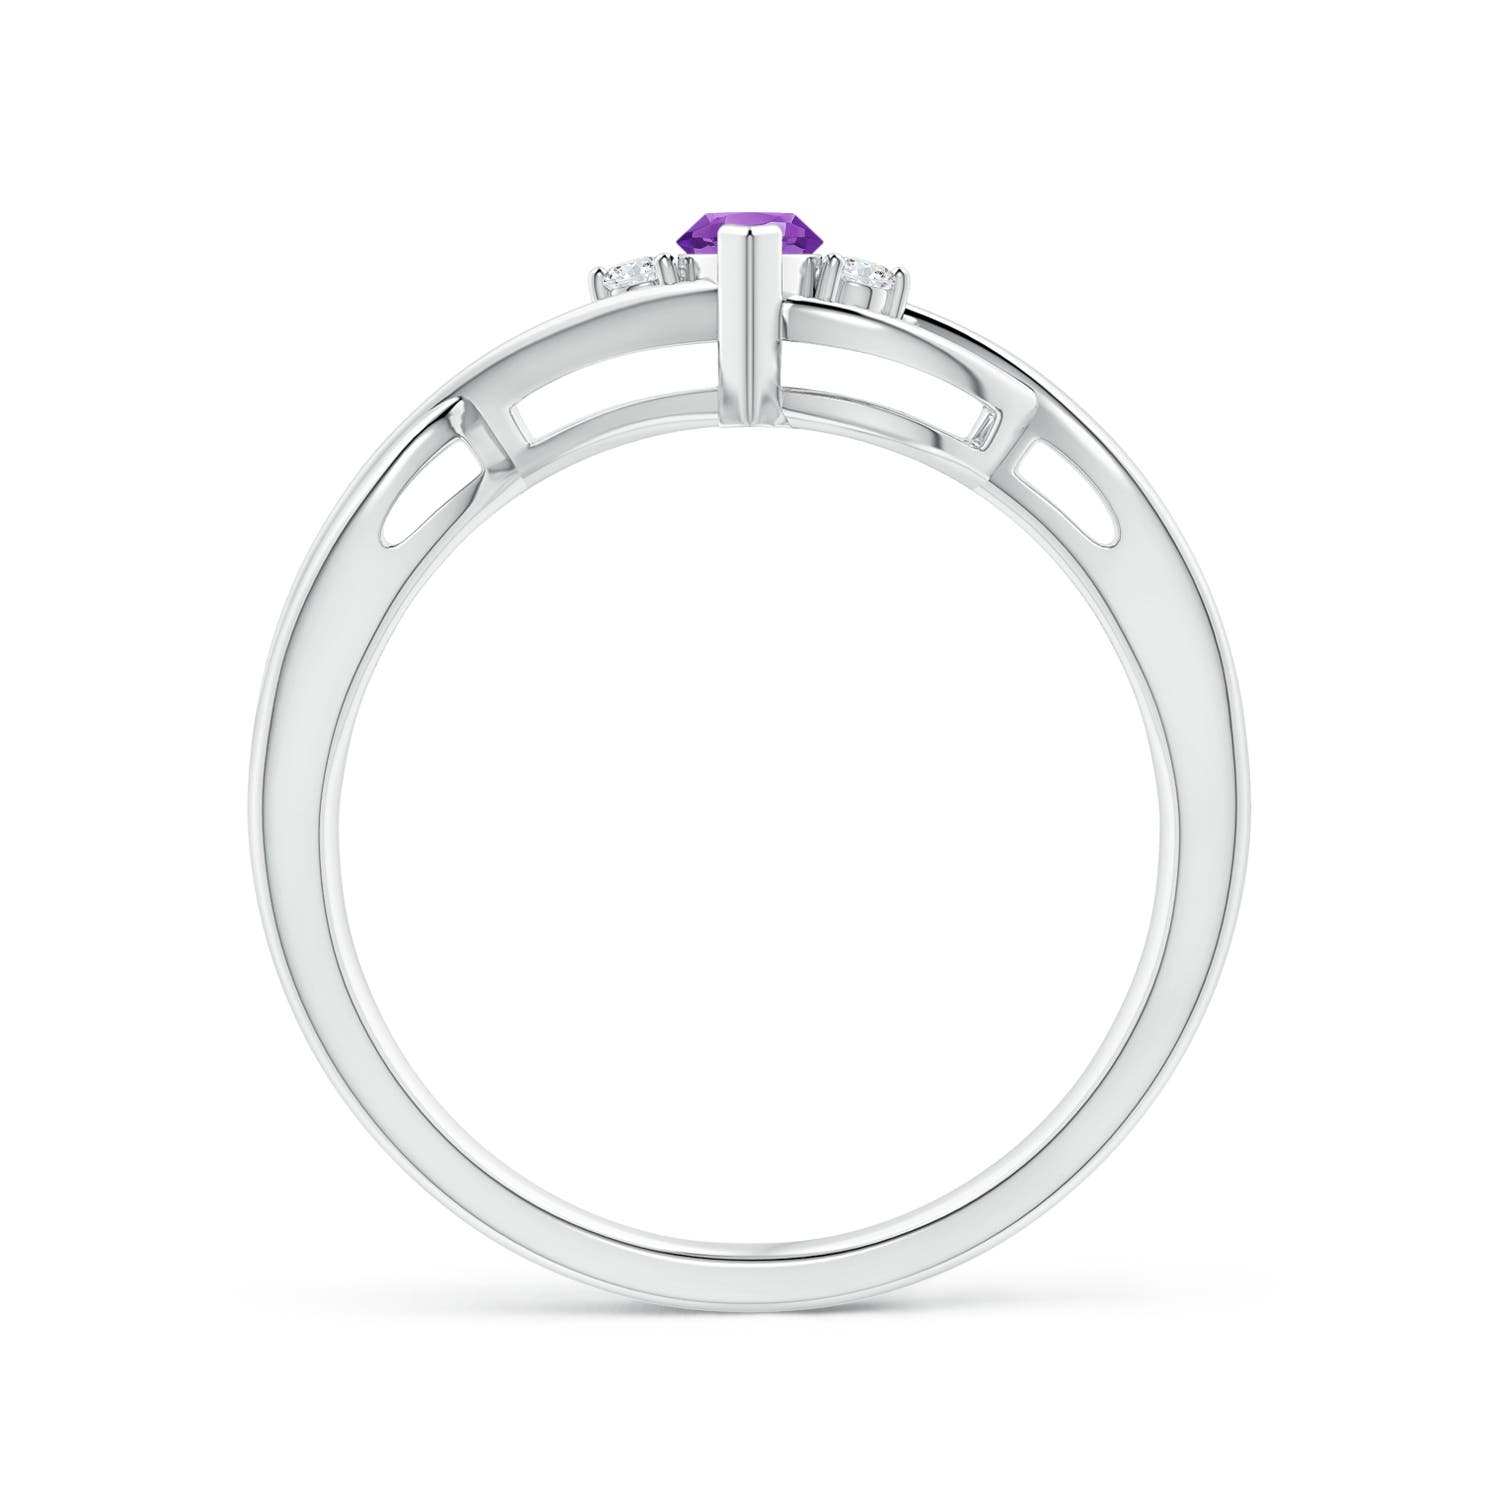 AAA - Amethyst / 0.23 CT / 14 KT White Gold